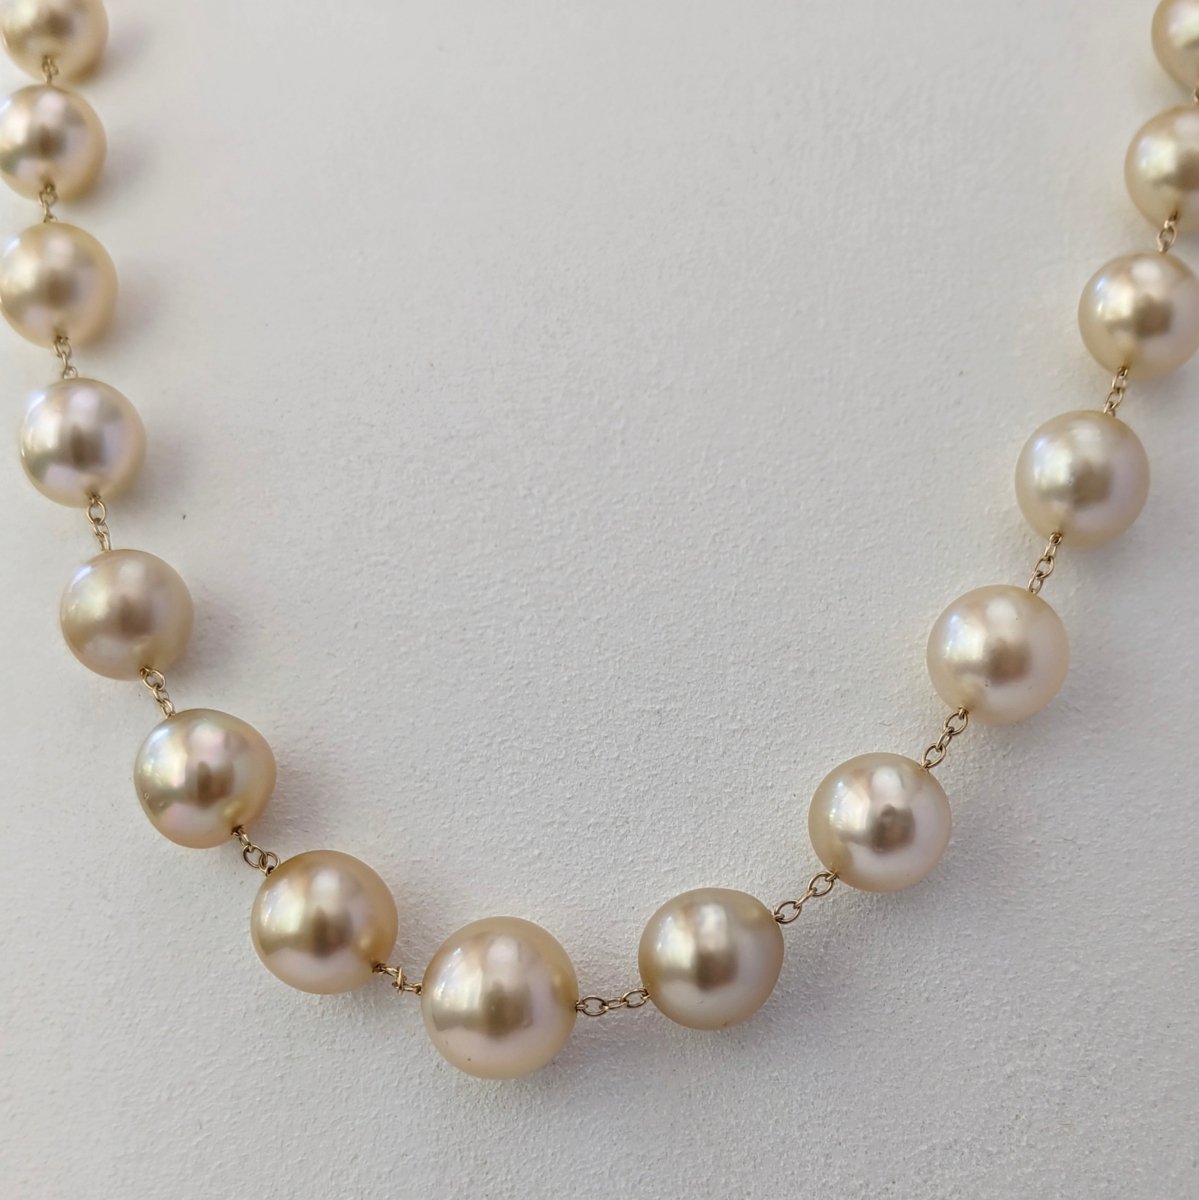 9-13mm Ombre Akoya and Golden South Sea Pearl Station Necklace - Marina Korneev FP